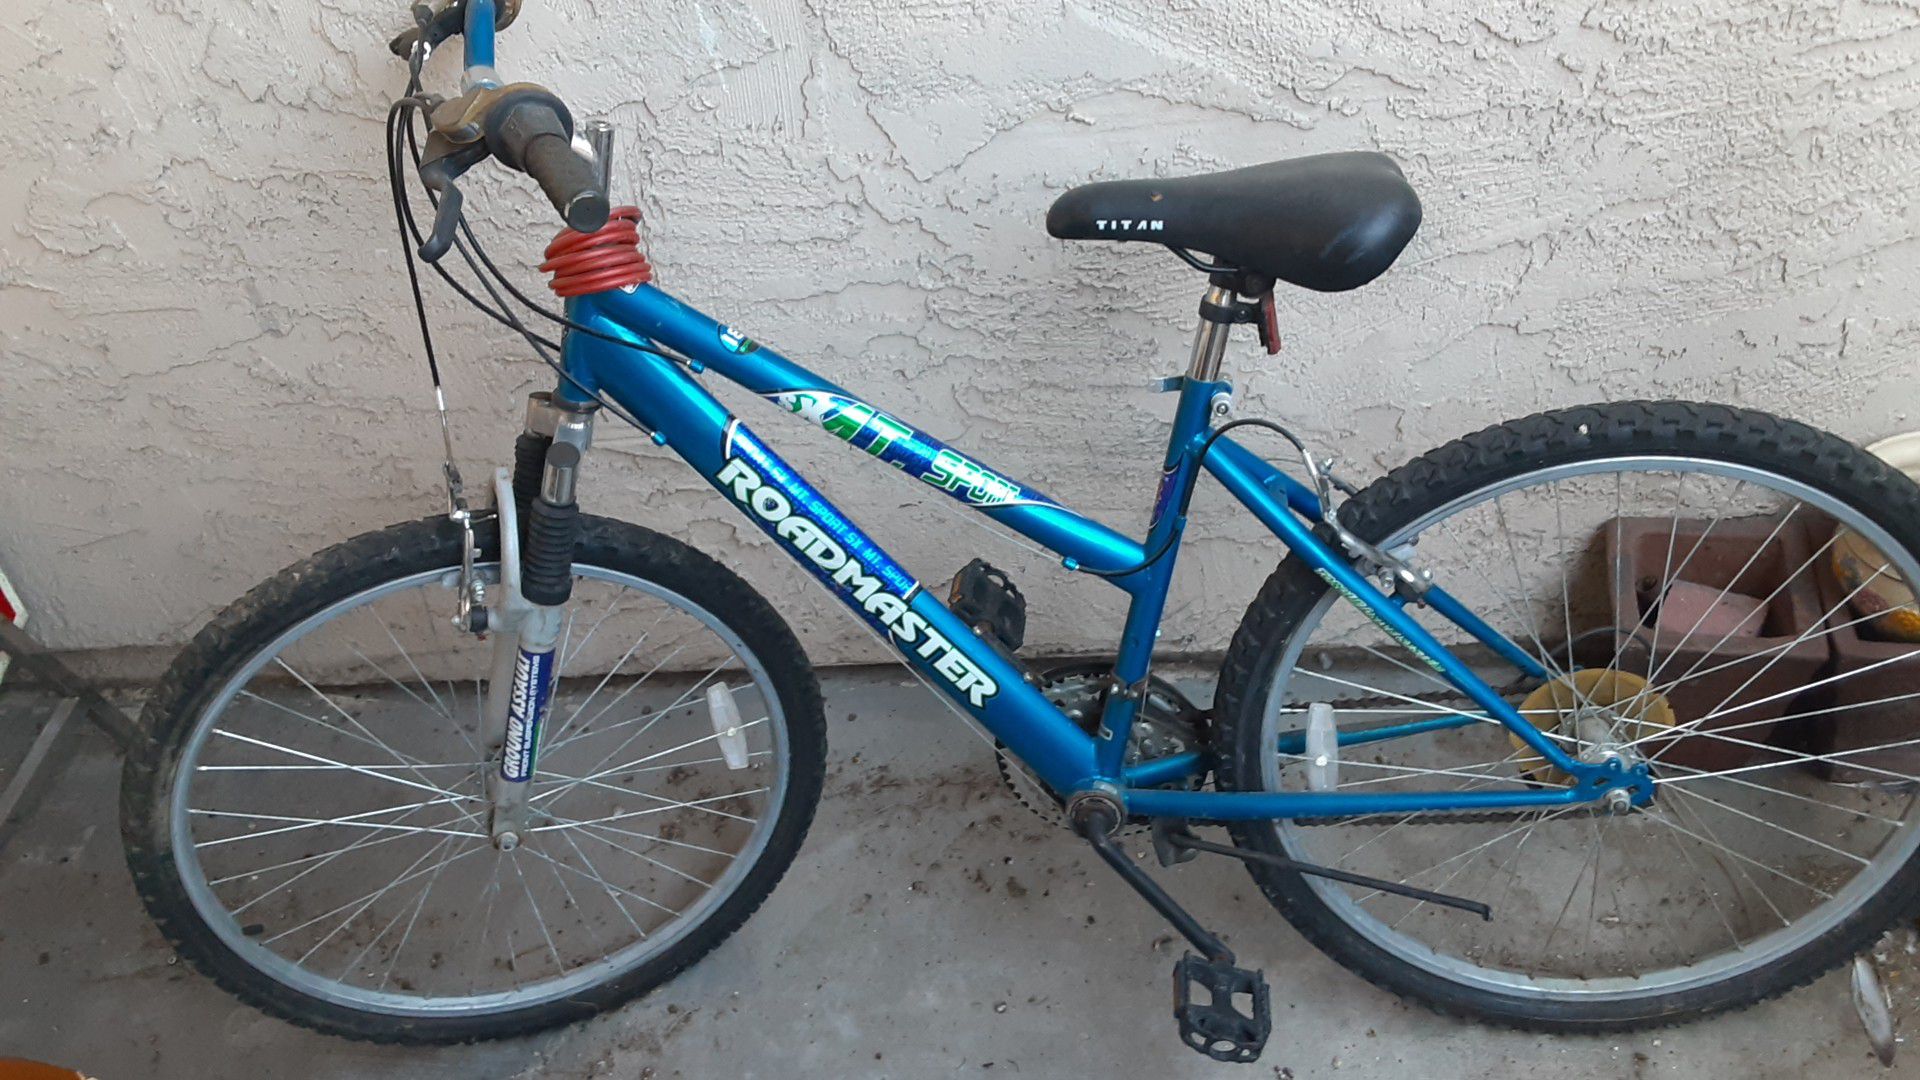 Roadmaster bike 15$ must sell today